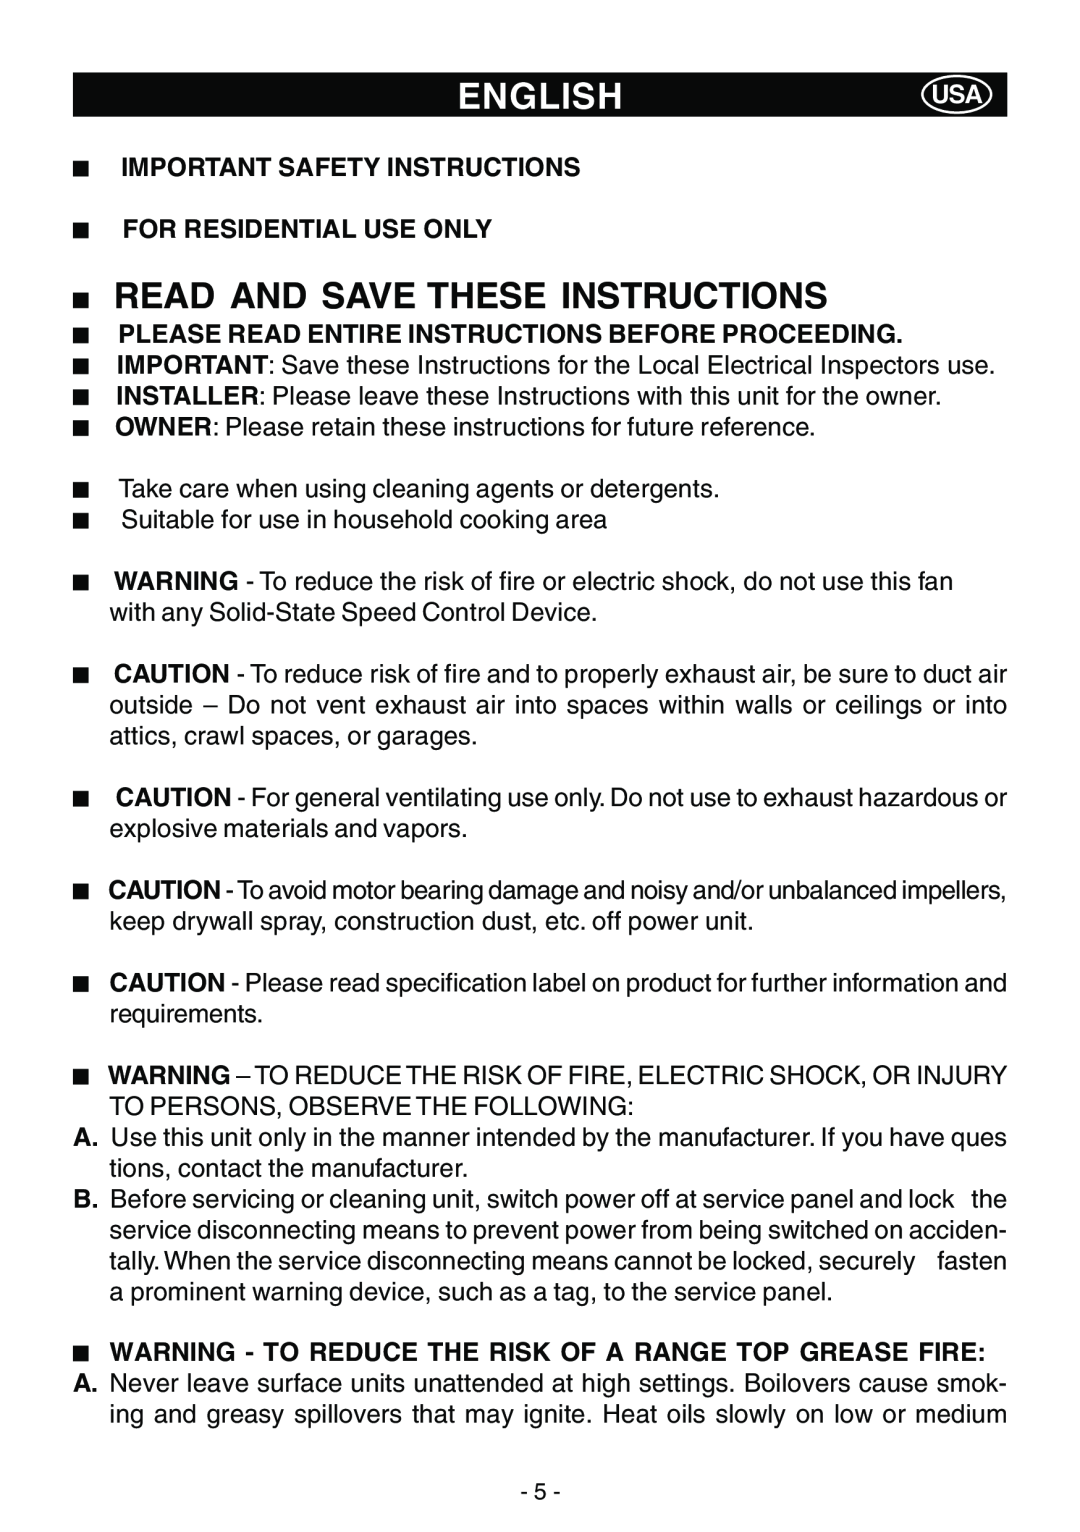 Elitair MC-I-6090 Read And Save These Instructions, Important Safety Instructions For Residential Use Only, Englishusa 